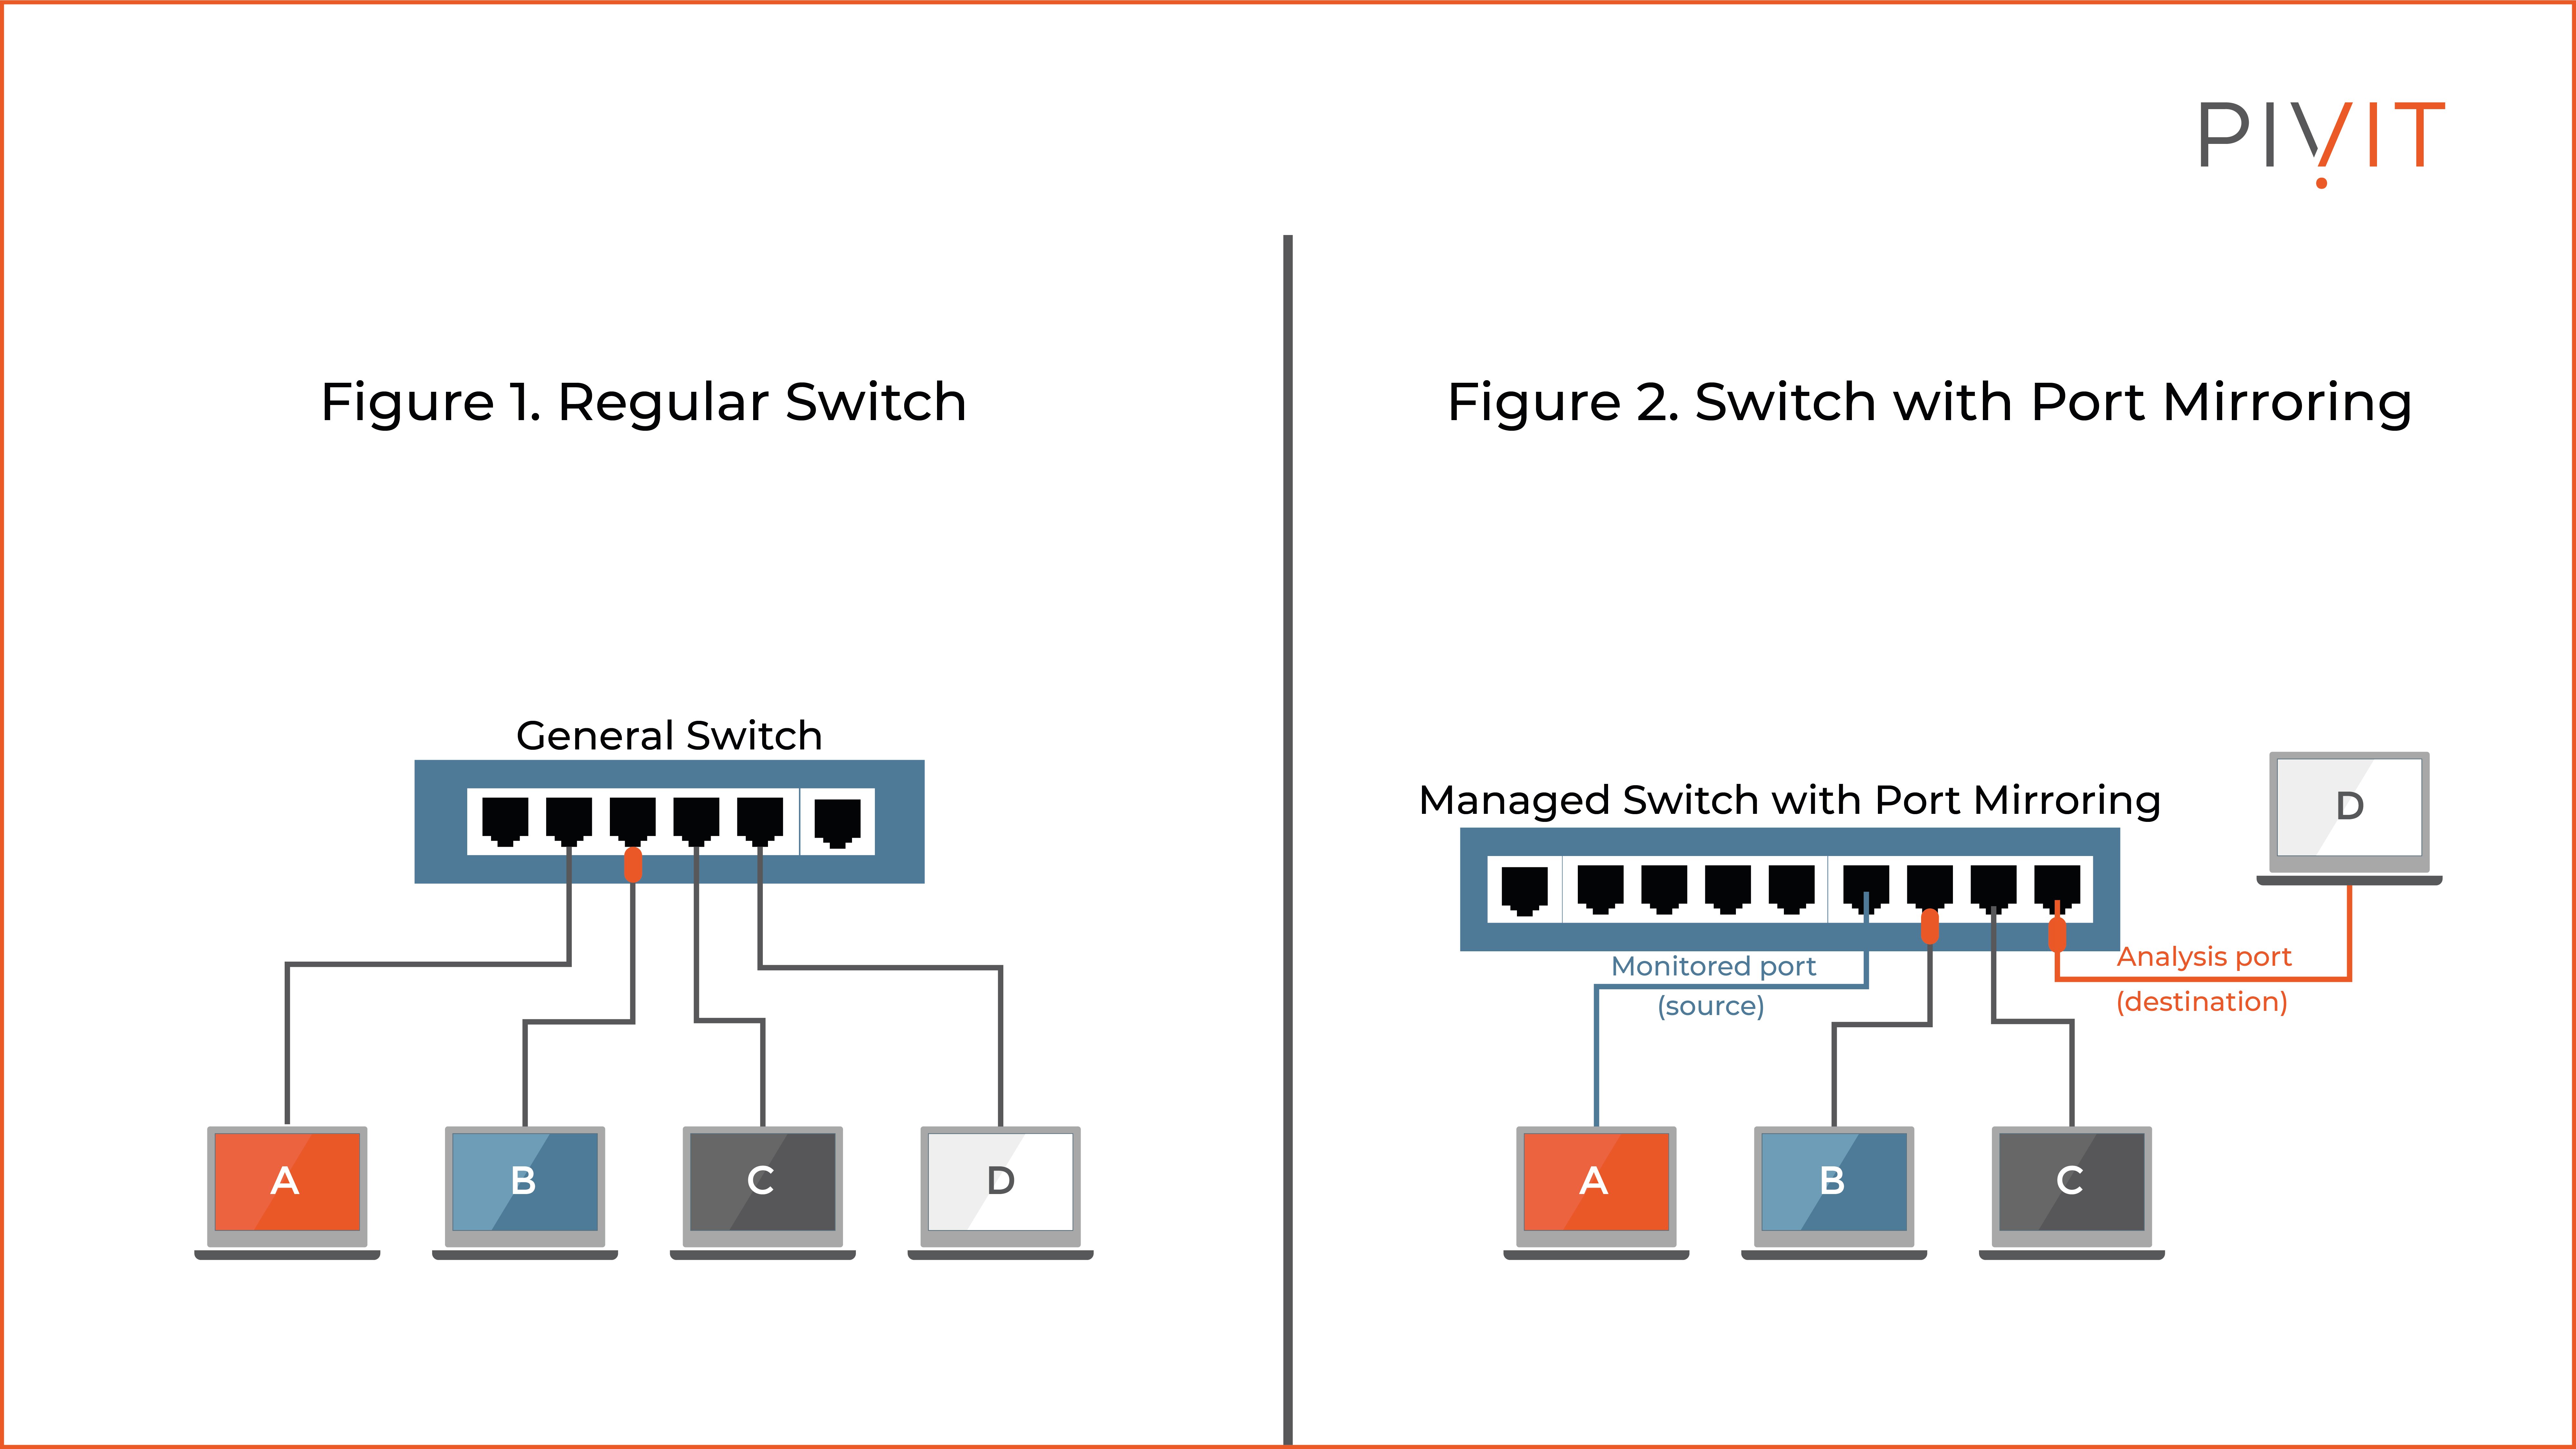 A comparison between a regular switch and a switch with port mirroring. Switch with port mirroring has a monitored port (source) and an analysis port (destination)